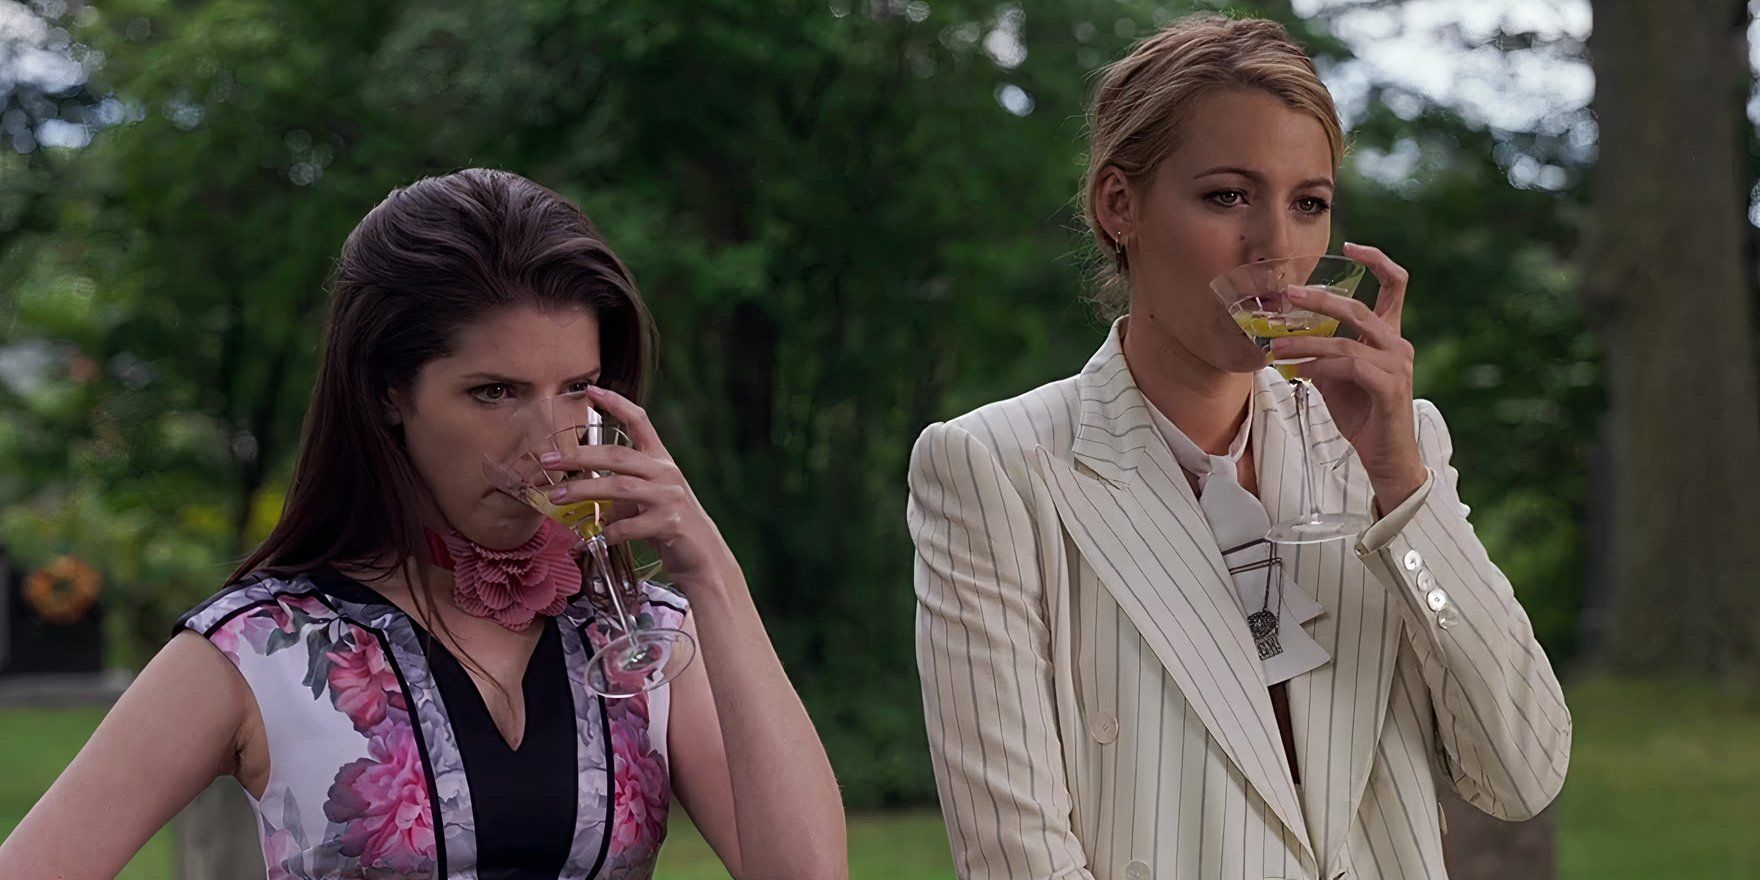 Anna Kendrick as Stephanie and Blake Lively as Emily drinking a martini in a scene from A Simple Favor